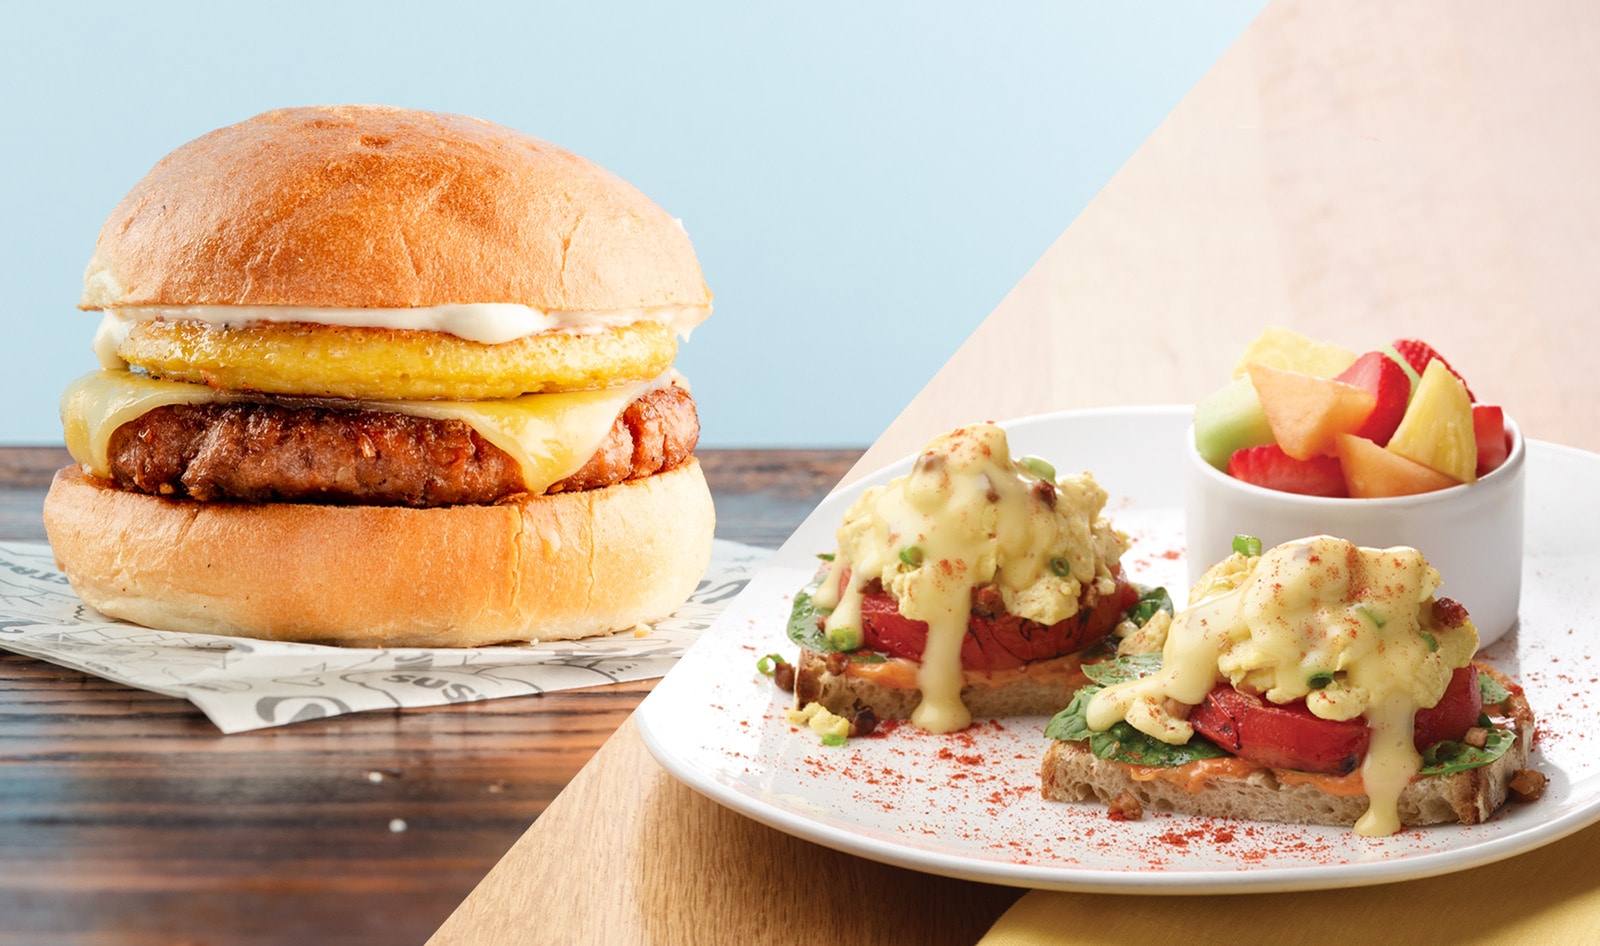 Vegan JUST Egg Breakfast Sandwiches and Benedicts Debut on the East Coast